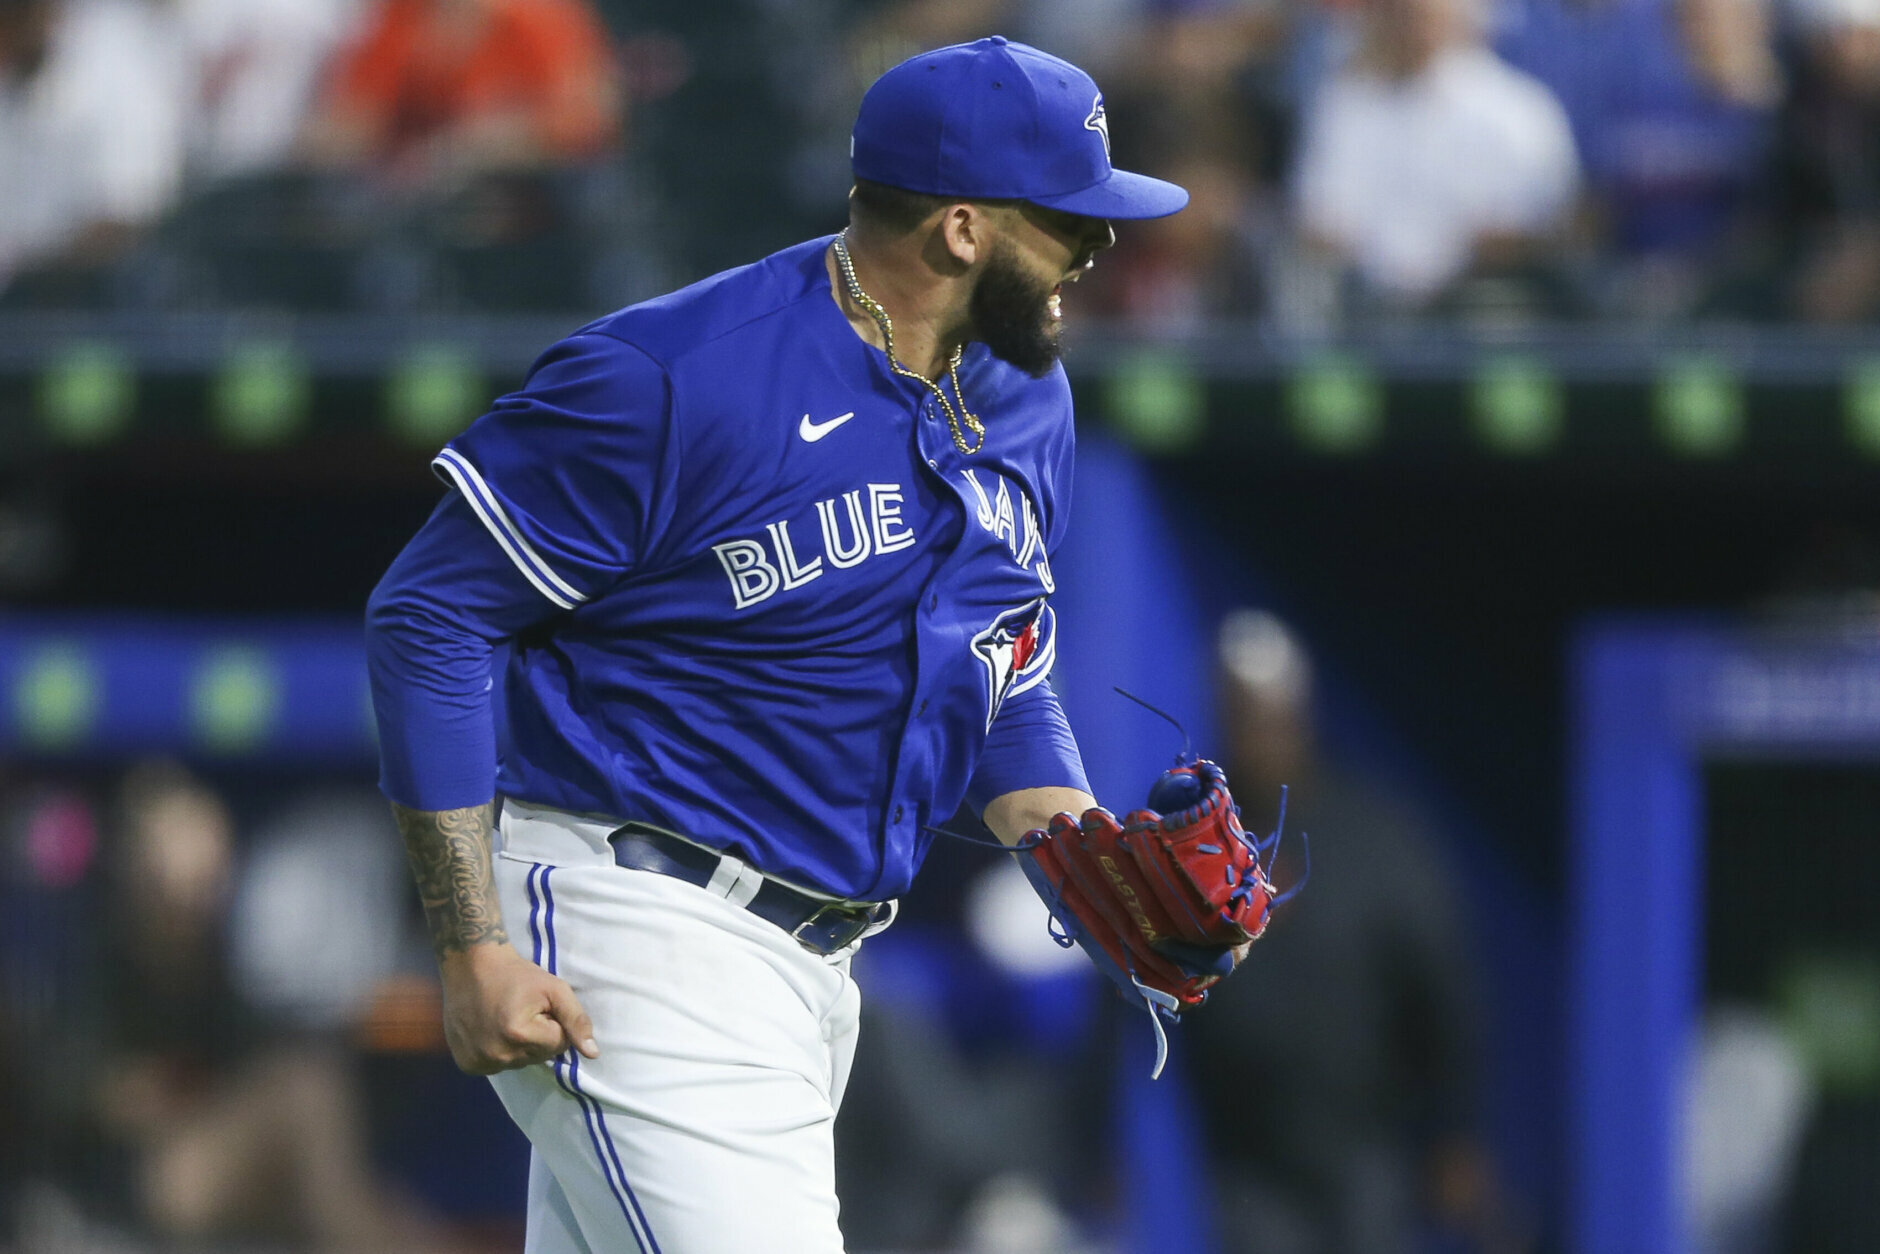 MLB: How Montoyo has done in Blue Jays' extra-innings losses